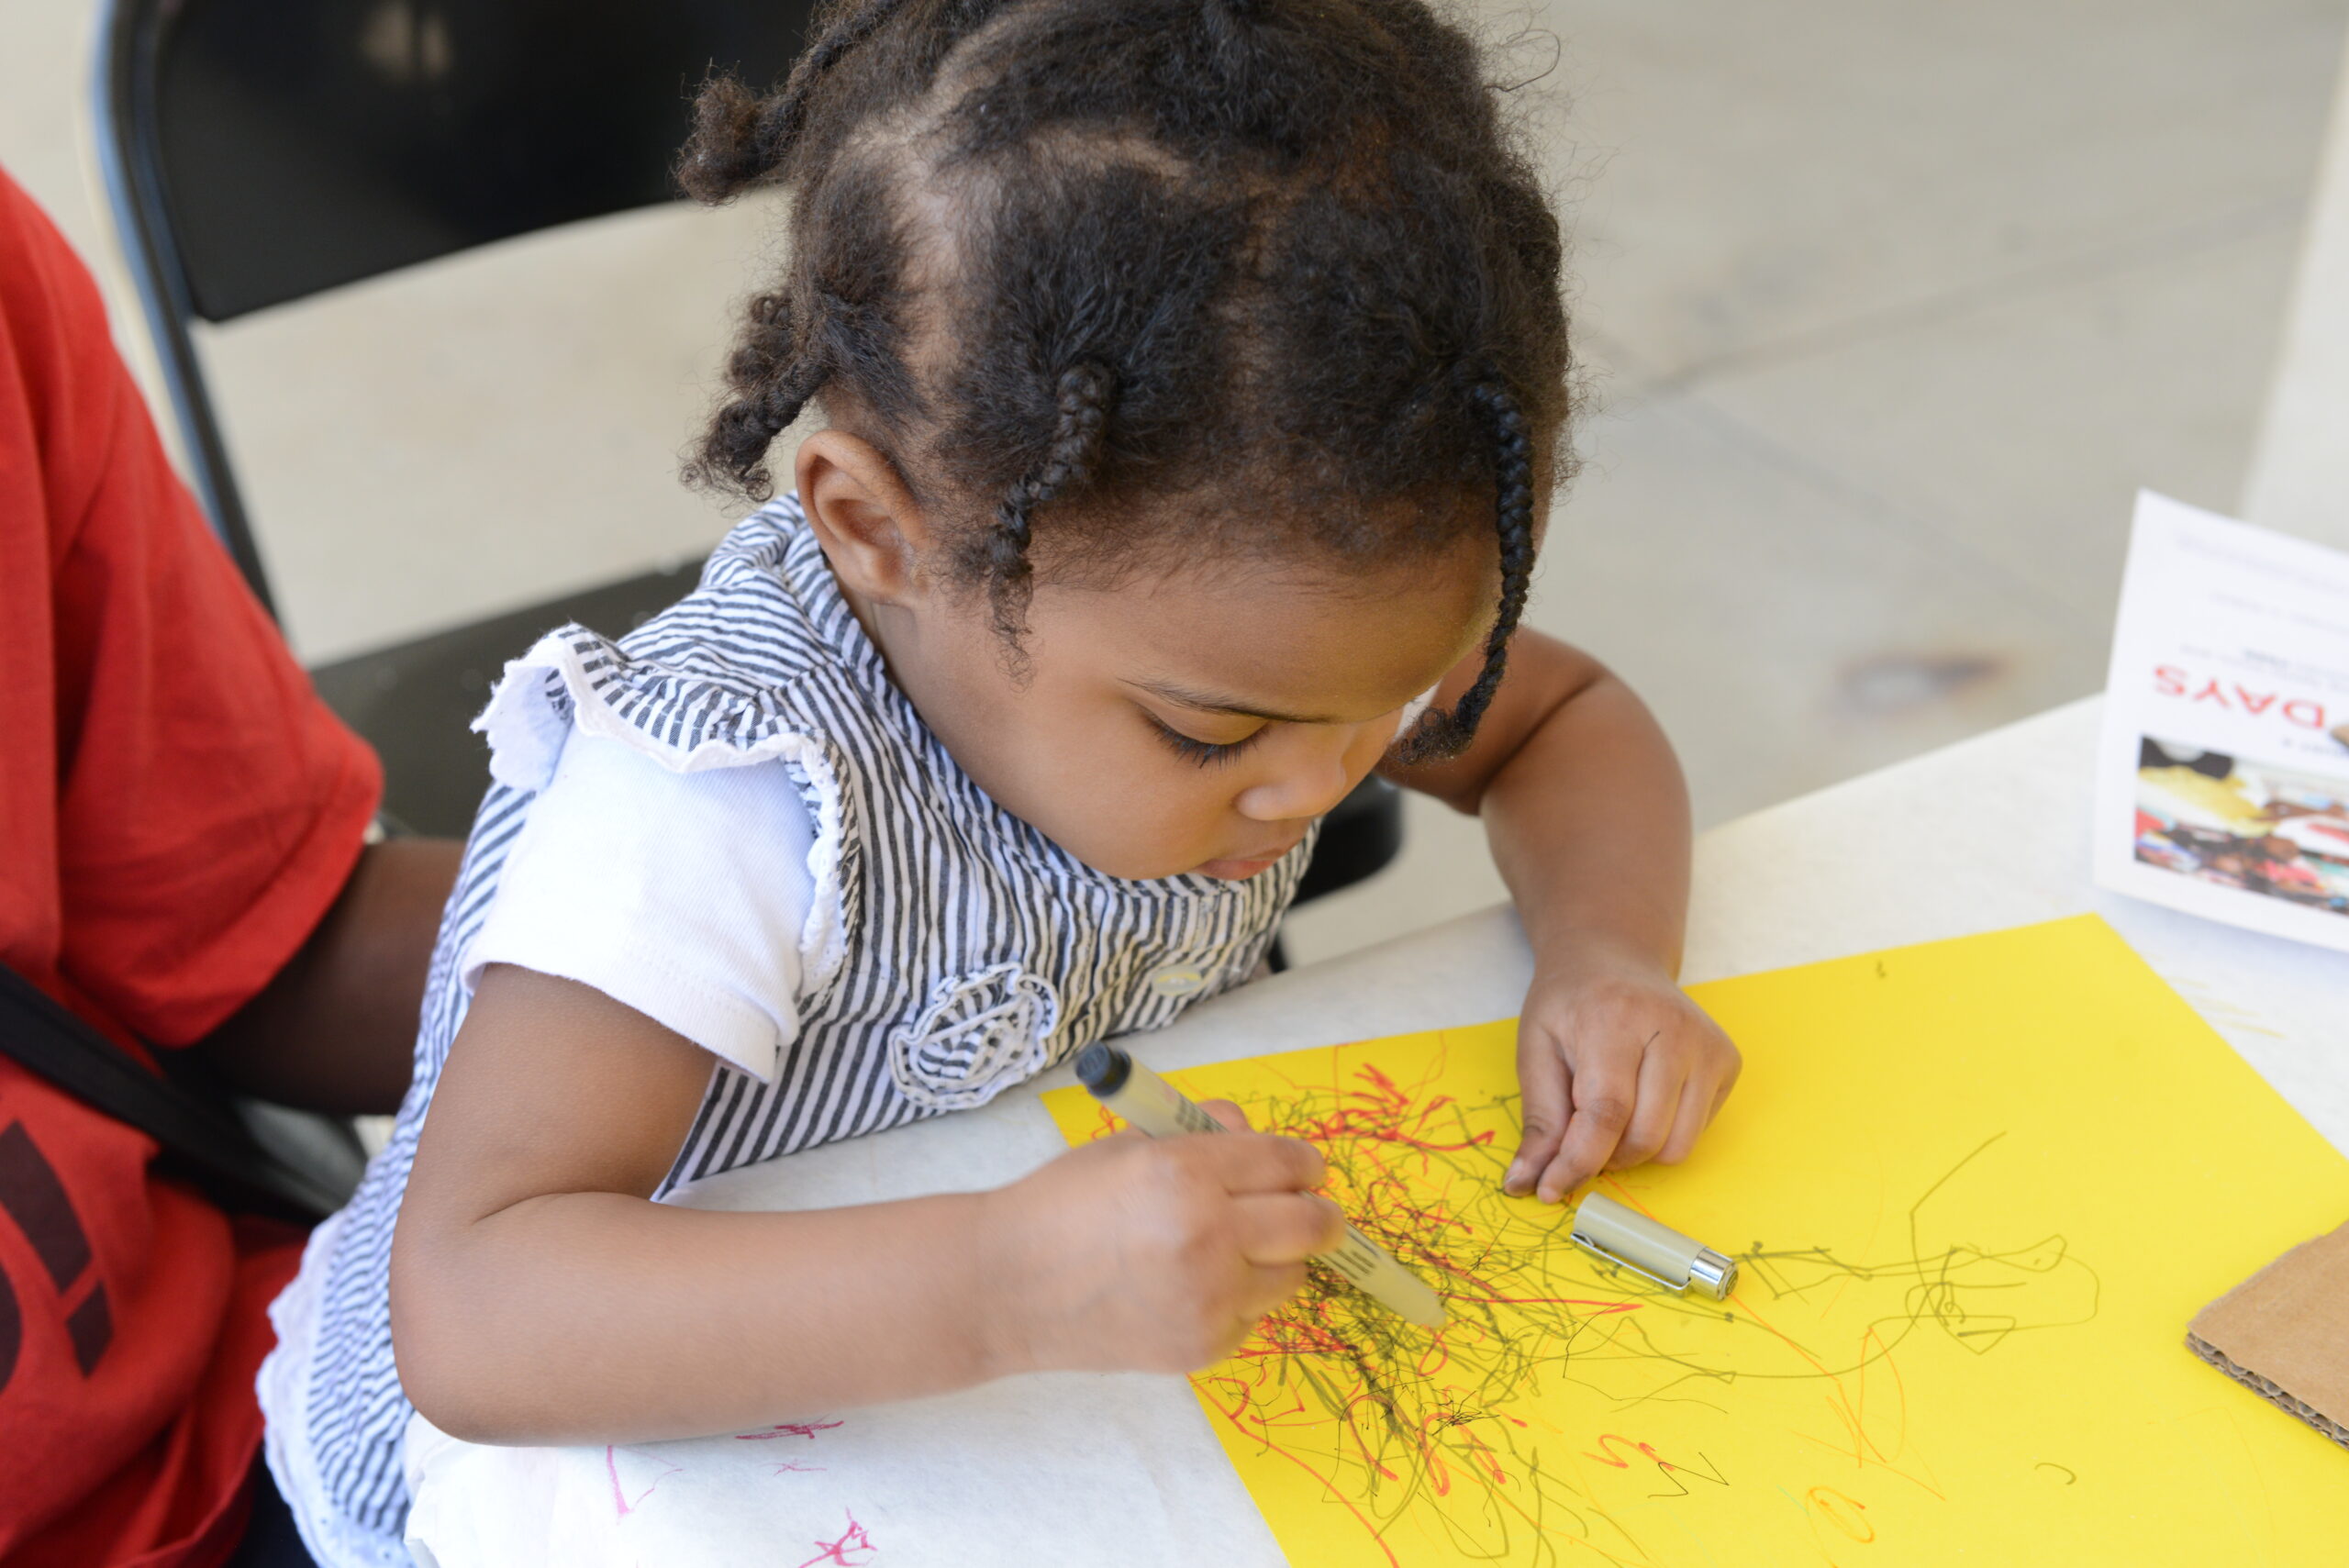 A child drawing with colored pens on yellow paper